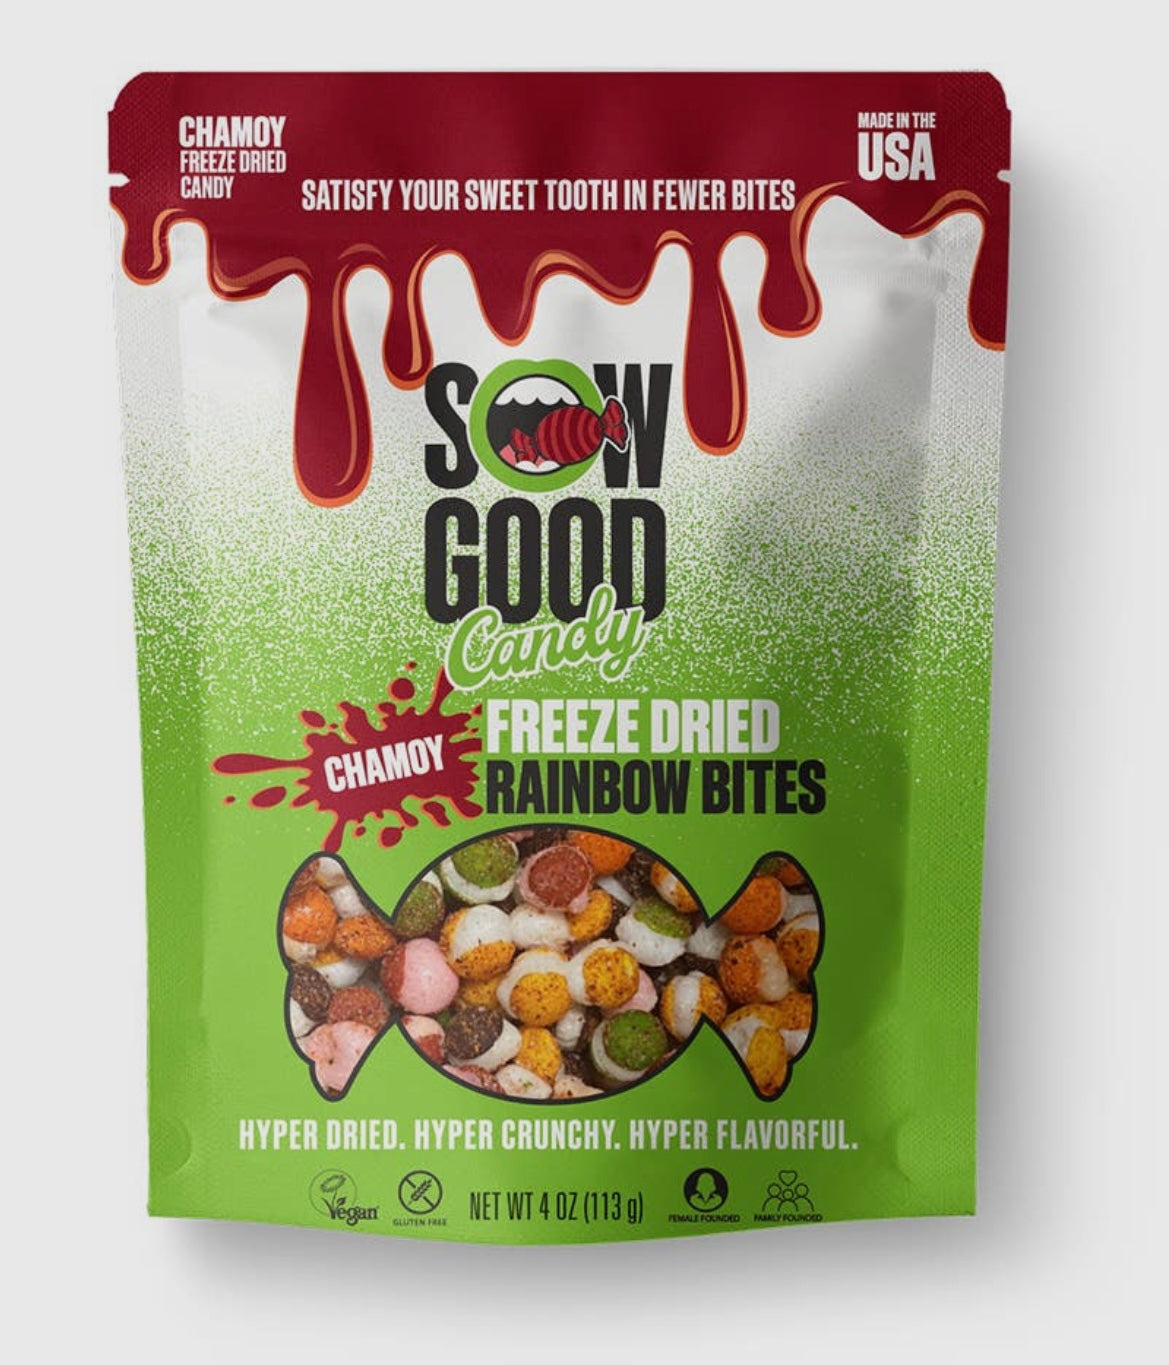 Sow Good Freeze Dried Candy